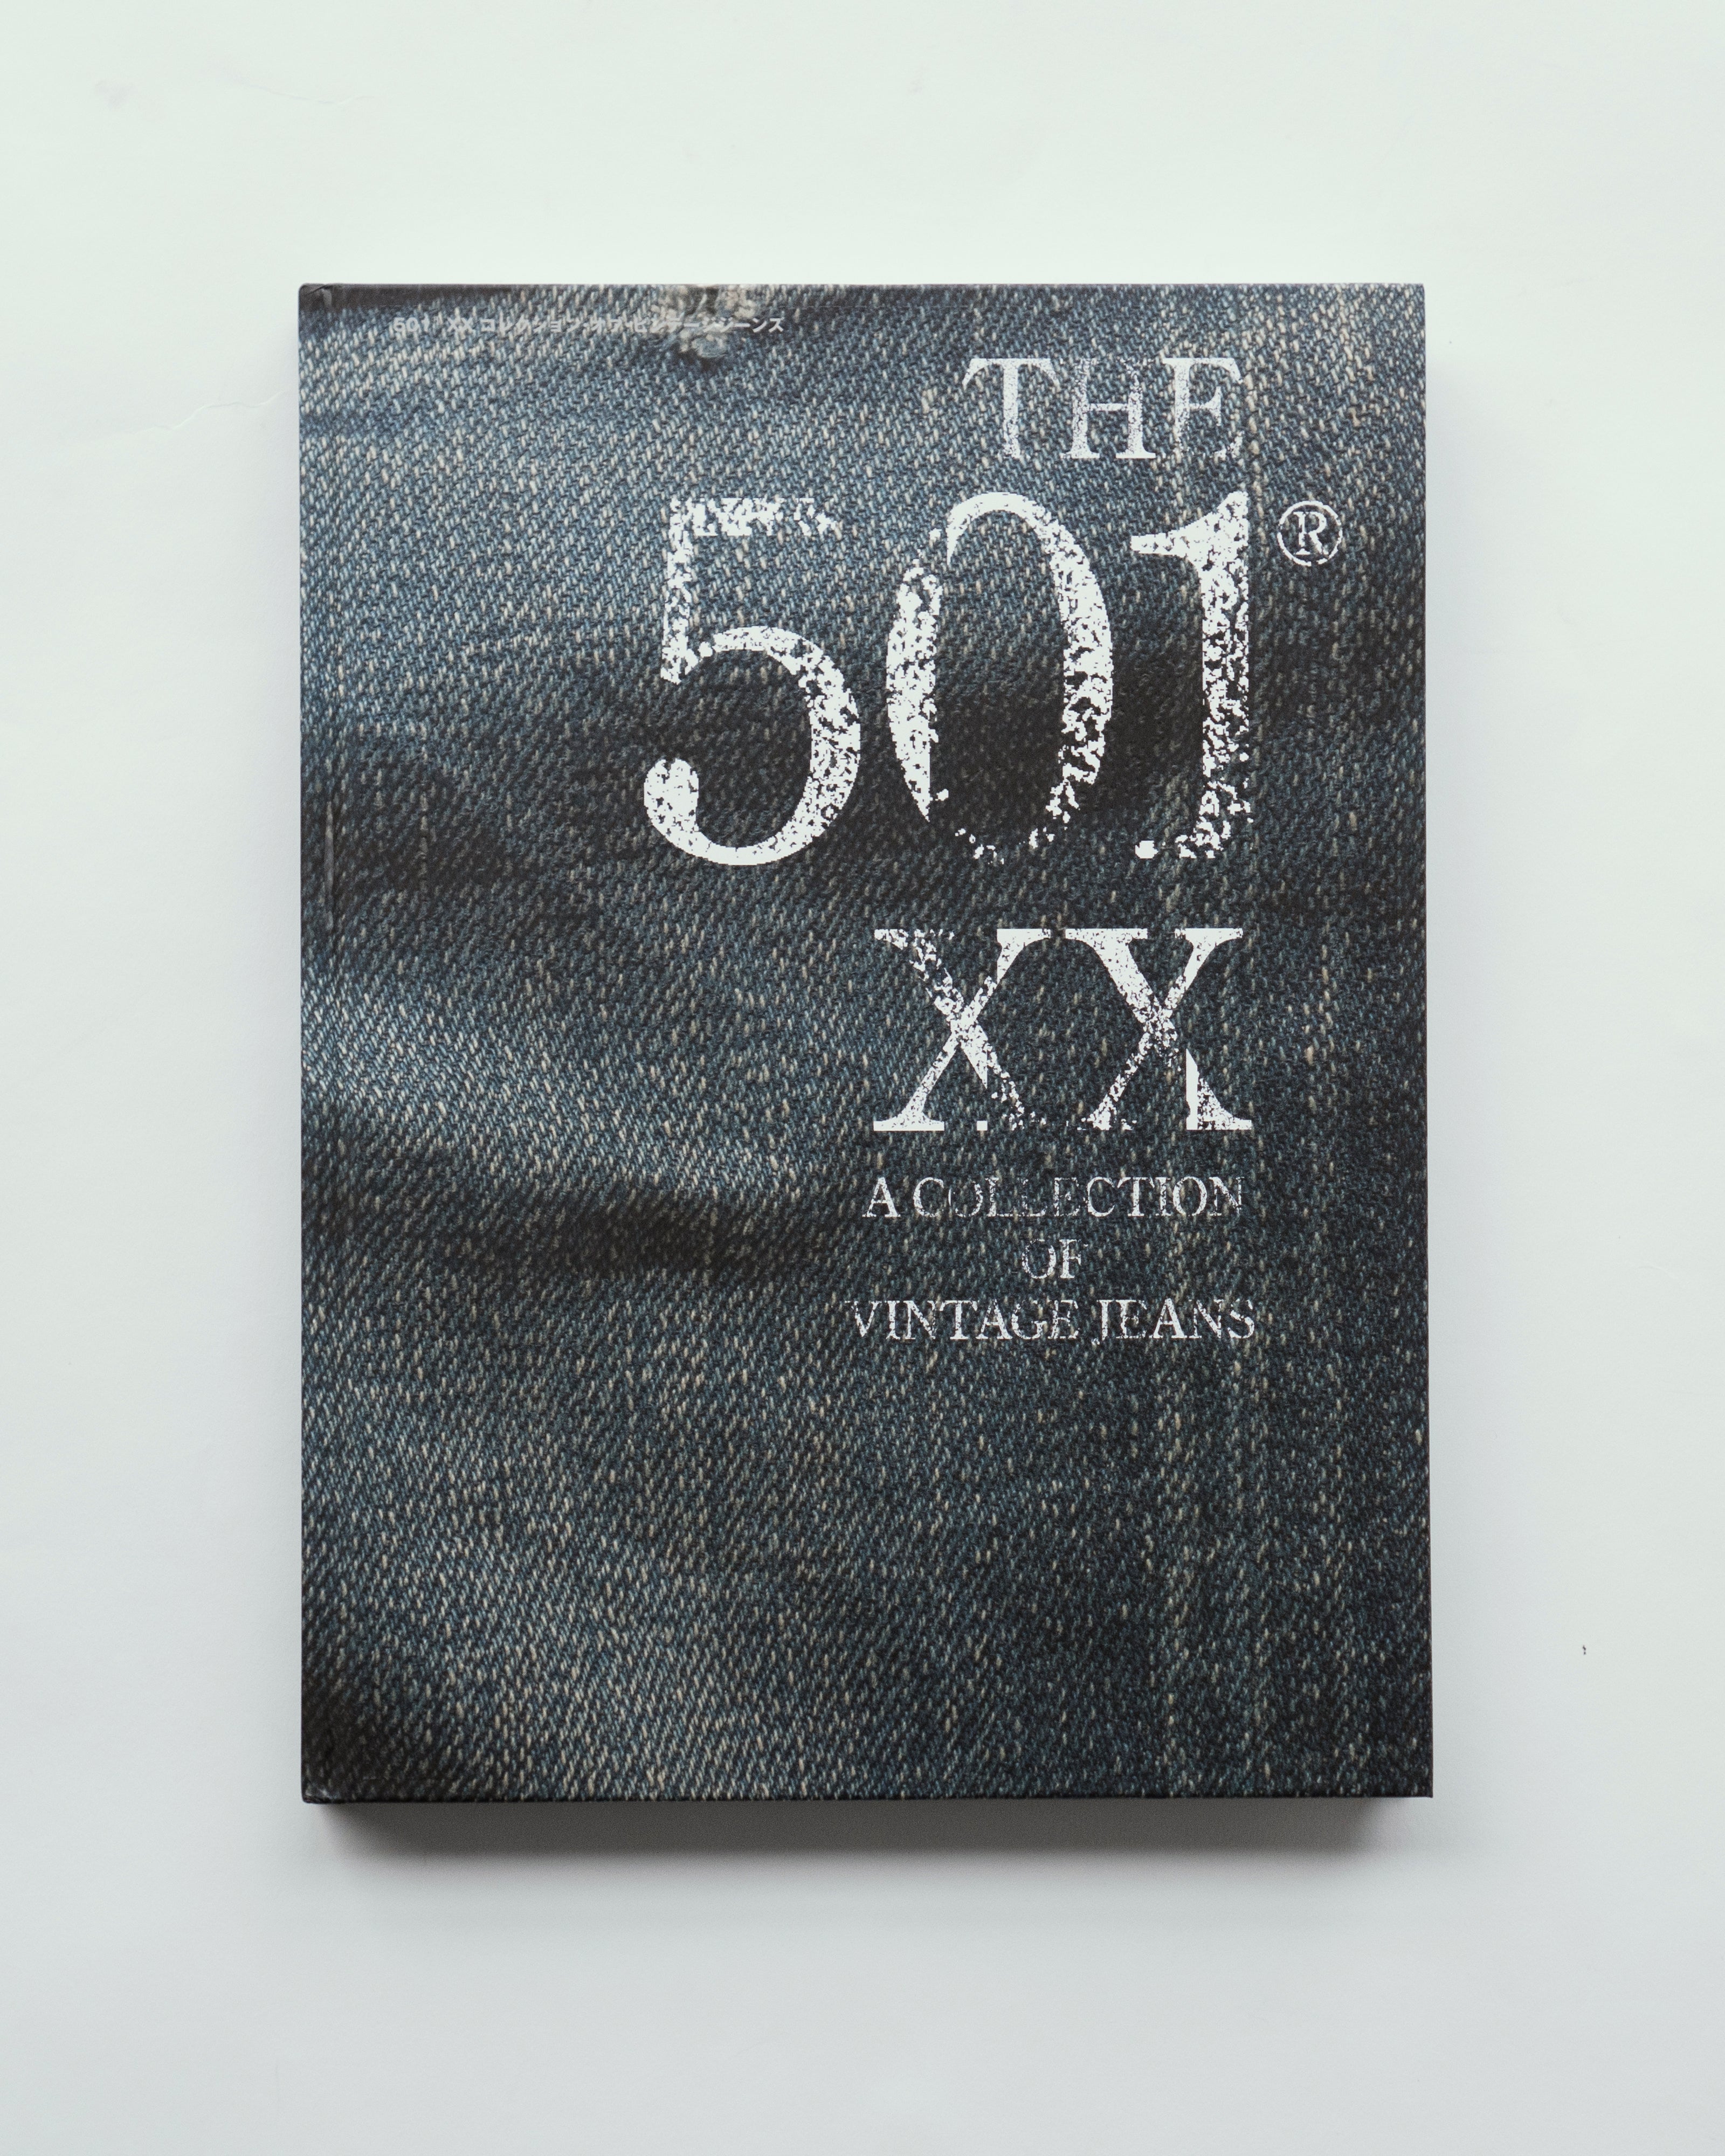 The 501XX: A Collection of Vintage Jeans